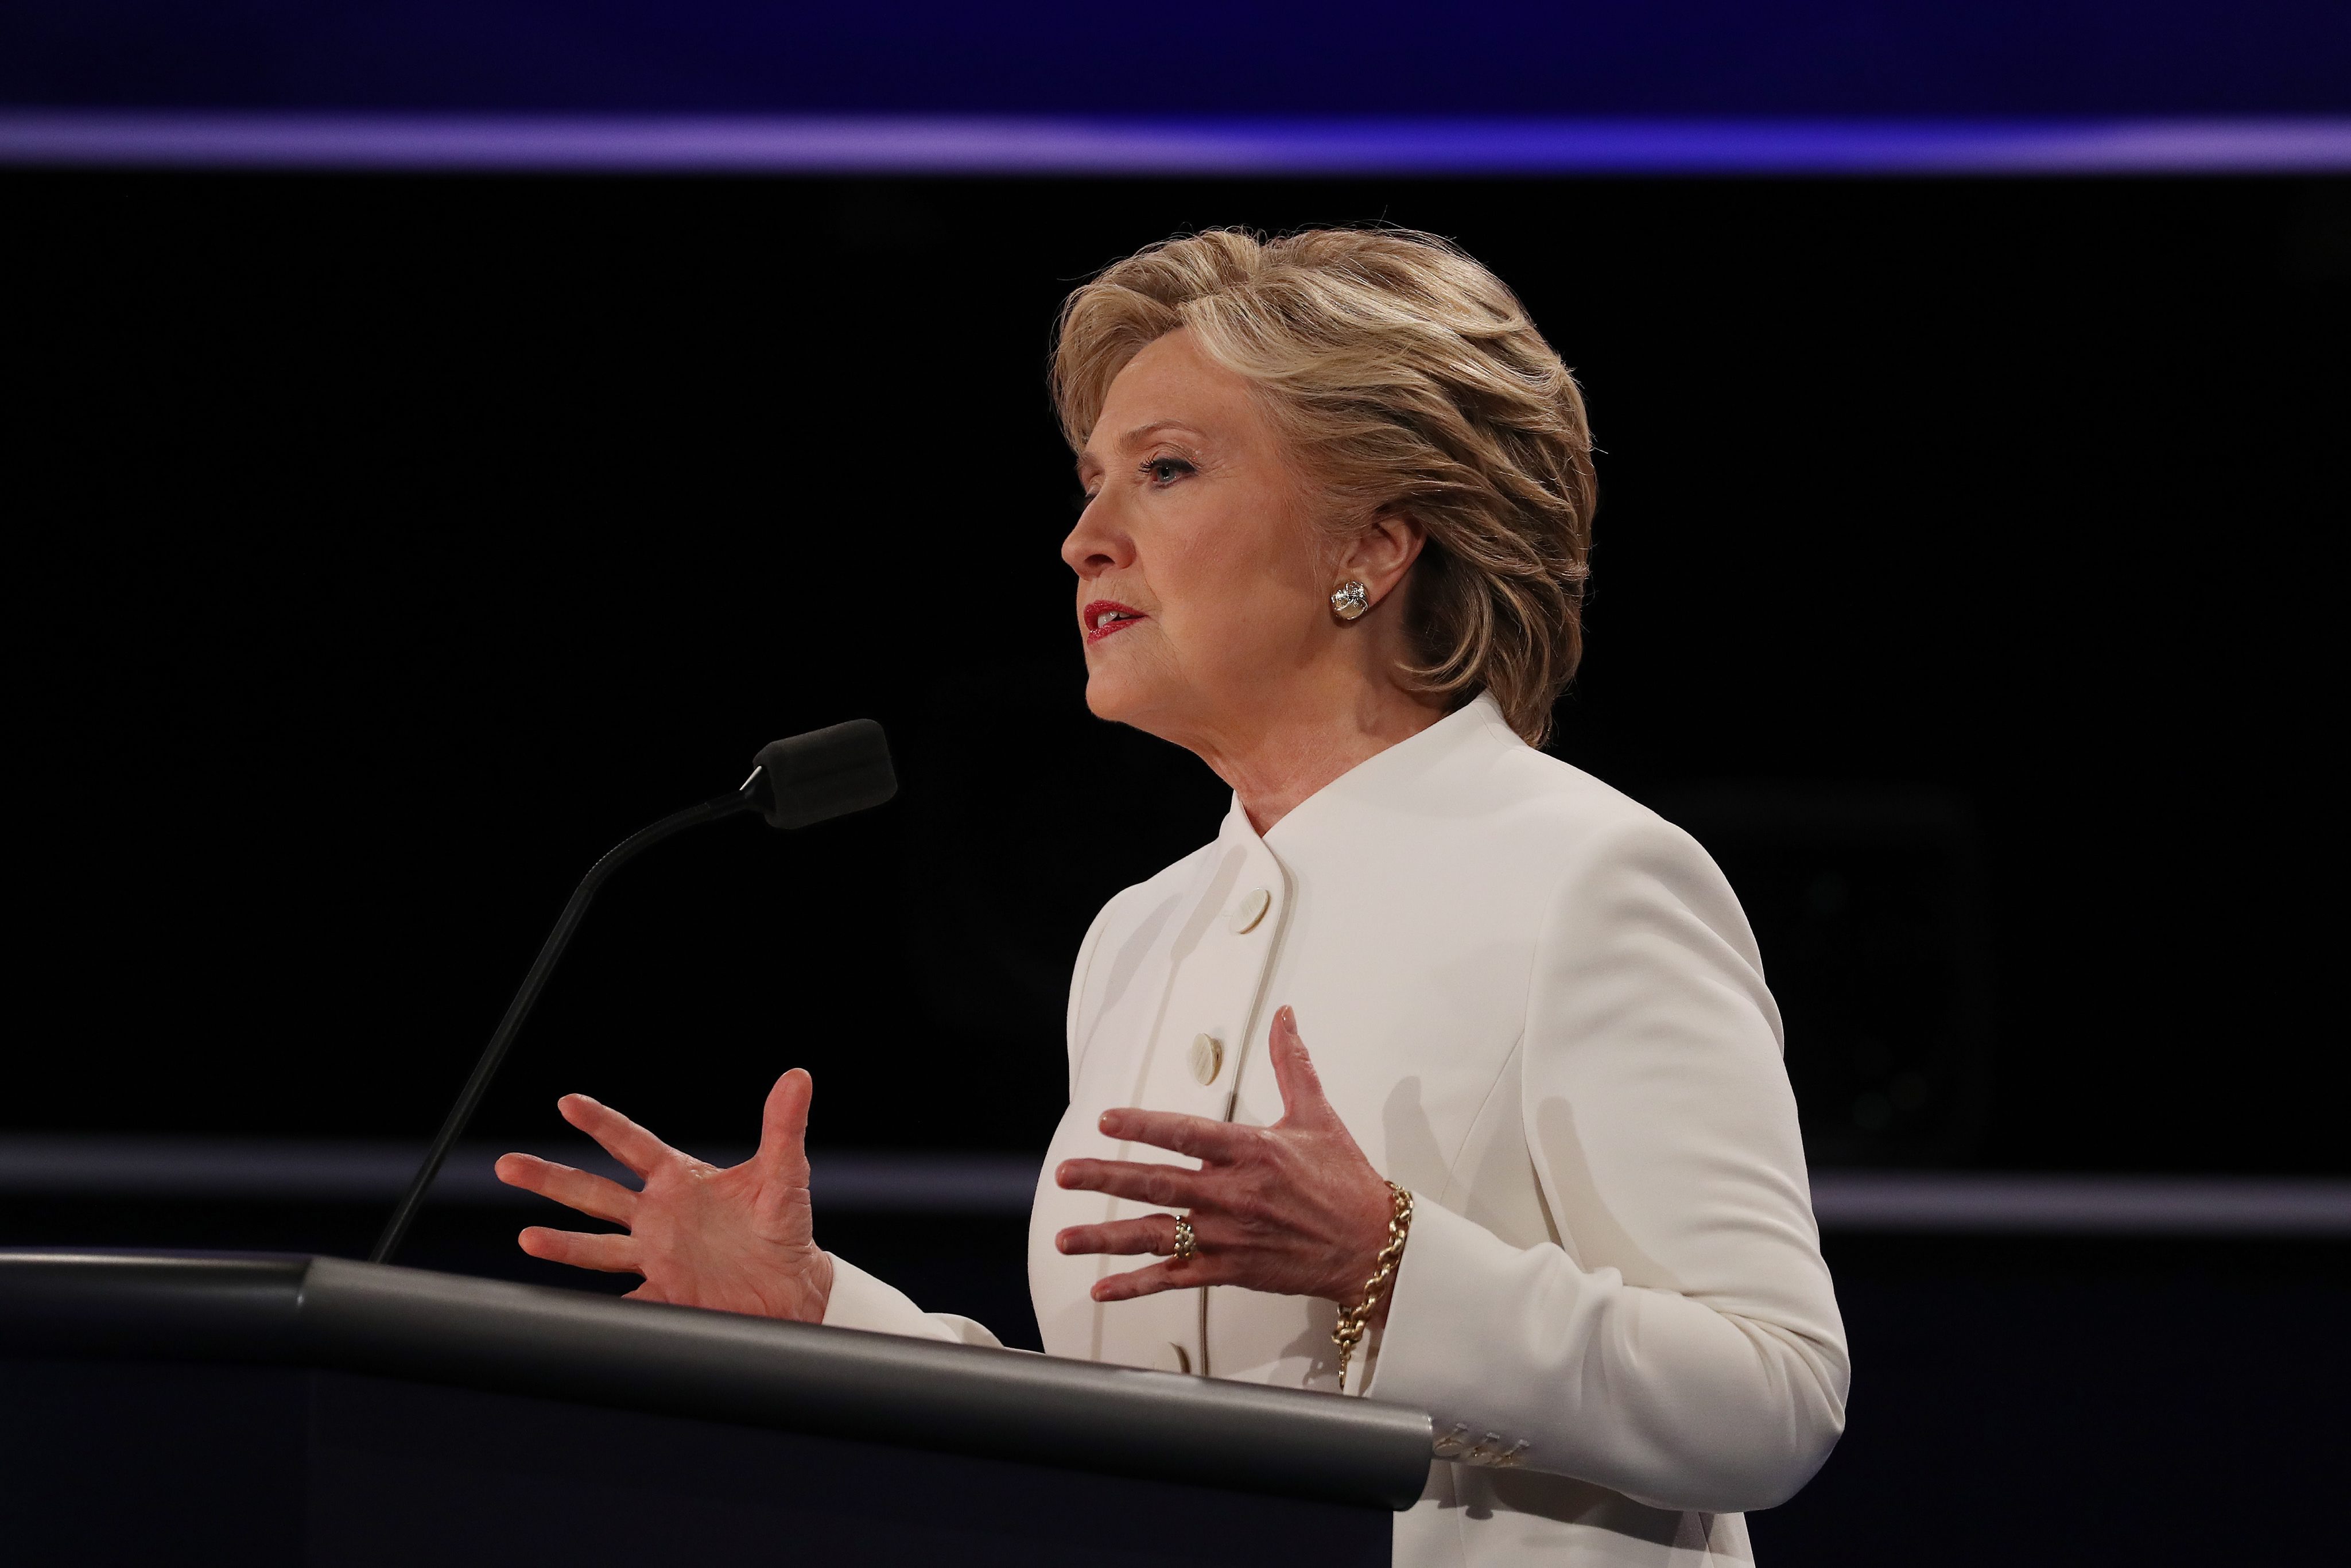 2016-10-19 17:02:31 epa05593057 Democratic candidate Hillary Clinton during the final Presidential Debate at the University of Nevada-Las Vegas in Las Vegas, Nevada, USA, 19 October 2016. The debate is the final of three Presidential Debates and one Vice Presidential Debate before the US National Election on 08 November 2016. EPA/JIM LO SCALZO